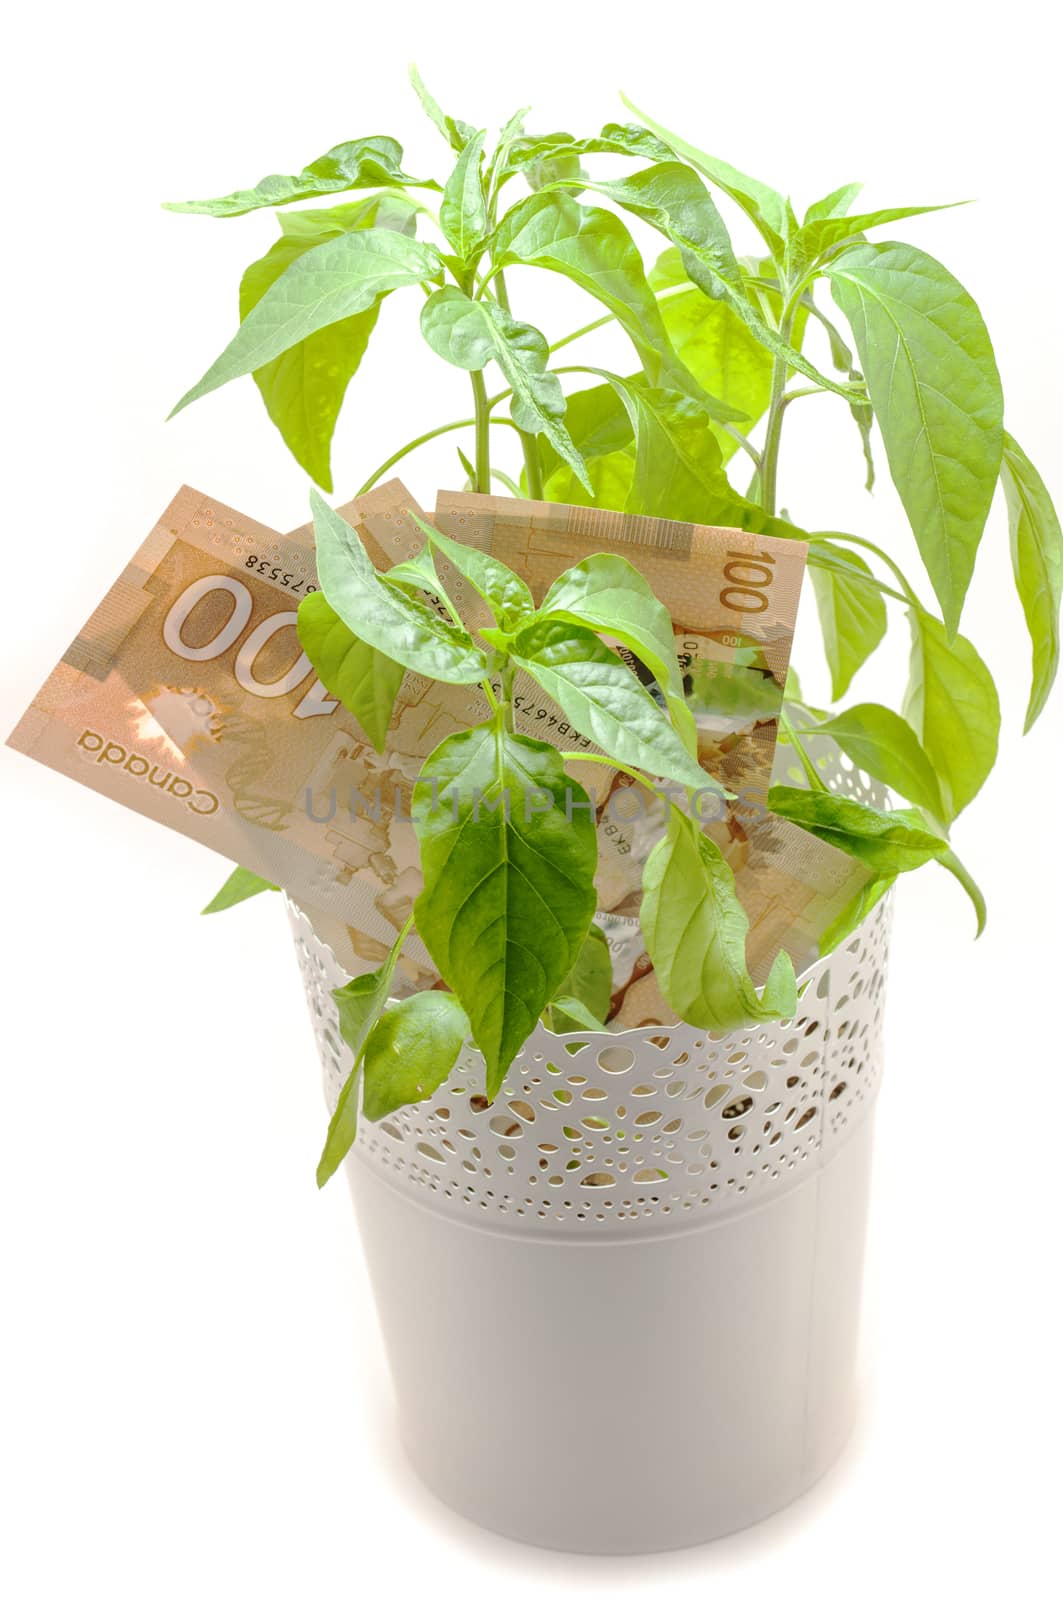 Hundred Canadian dollar bill and a green plant